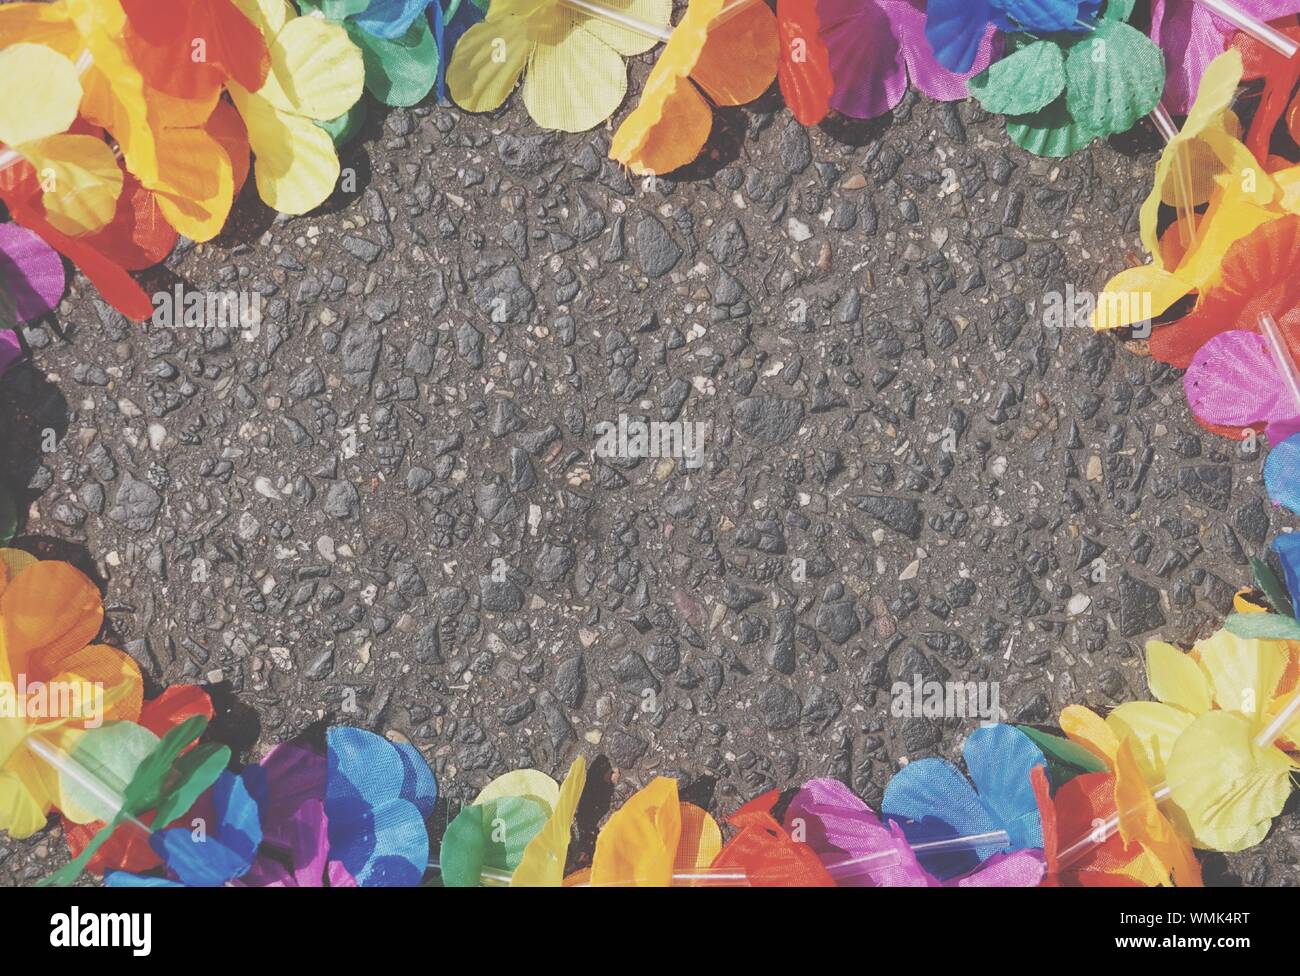 Directly Above Shot Of Colorful Garland On Street Stock Photo